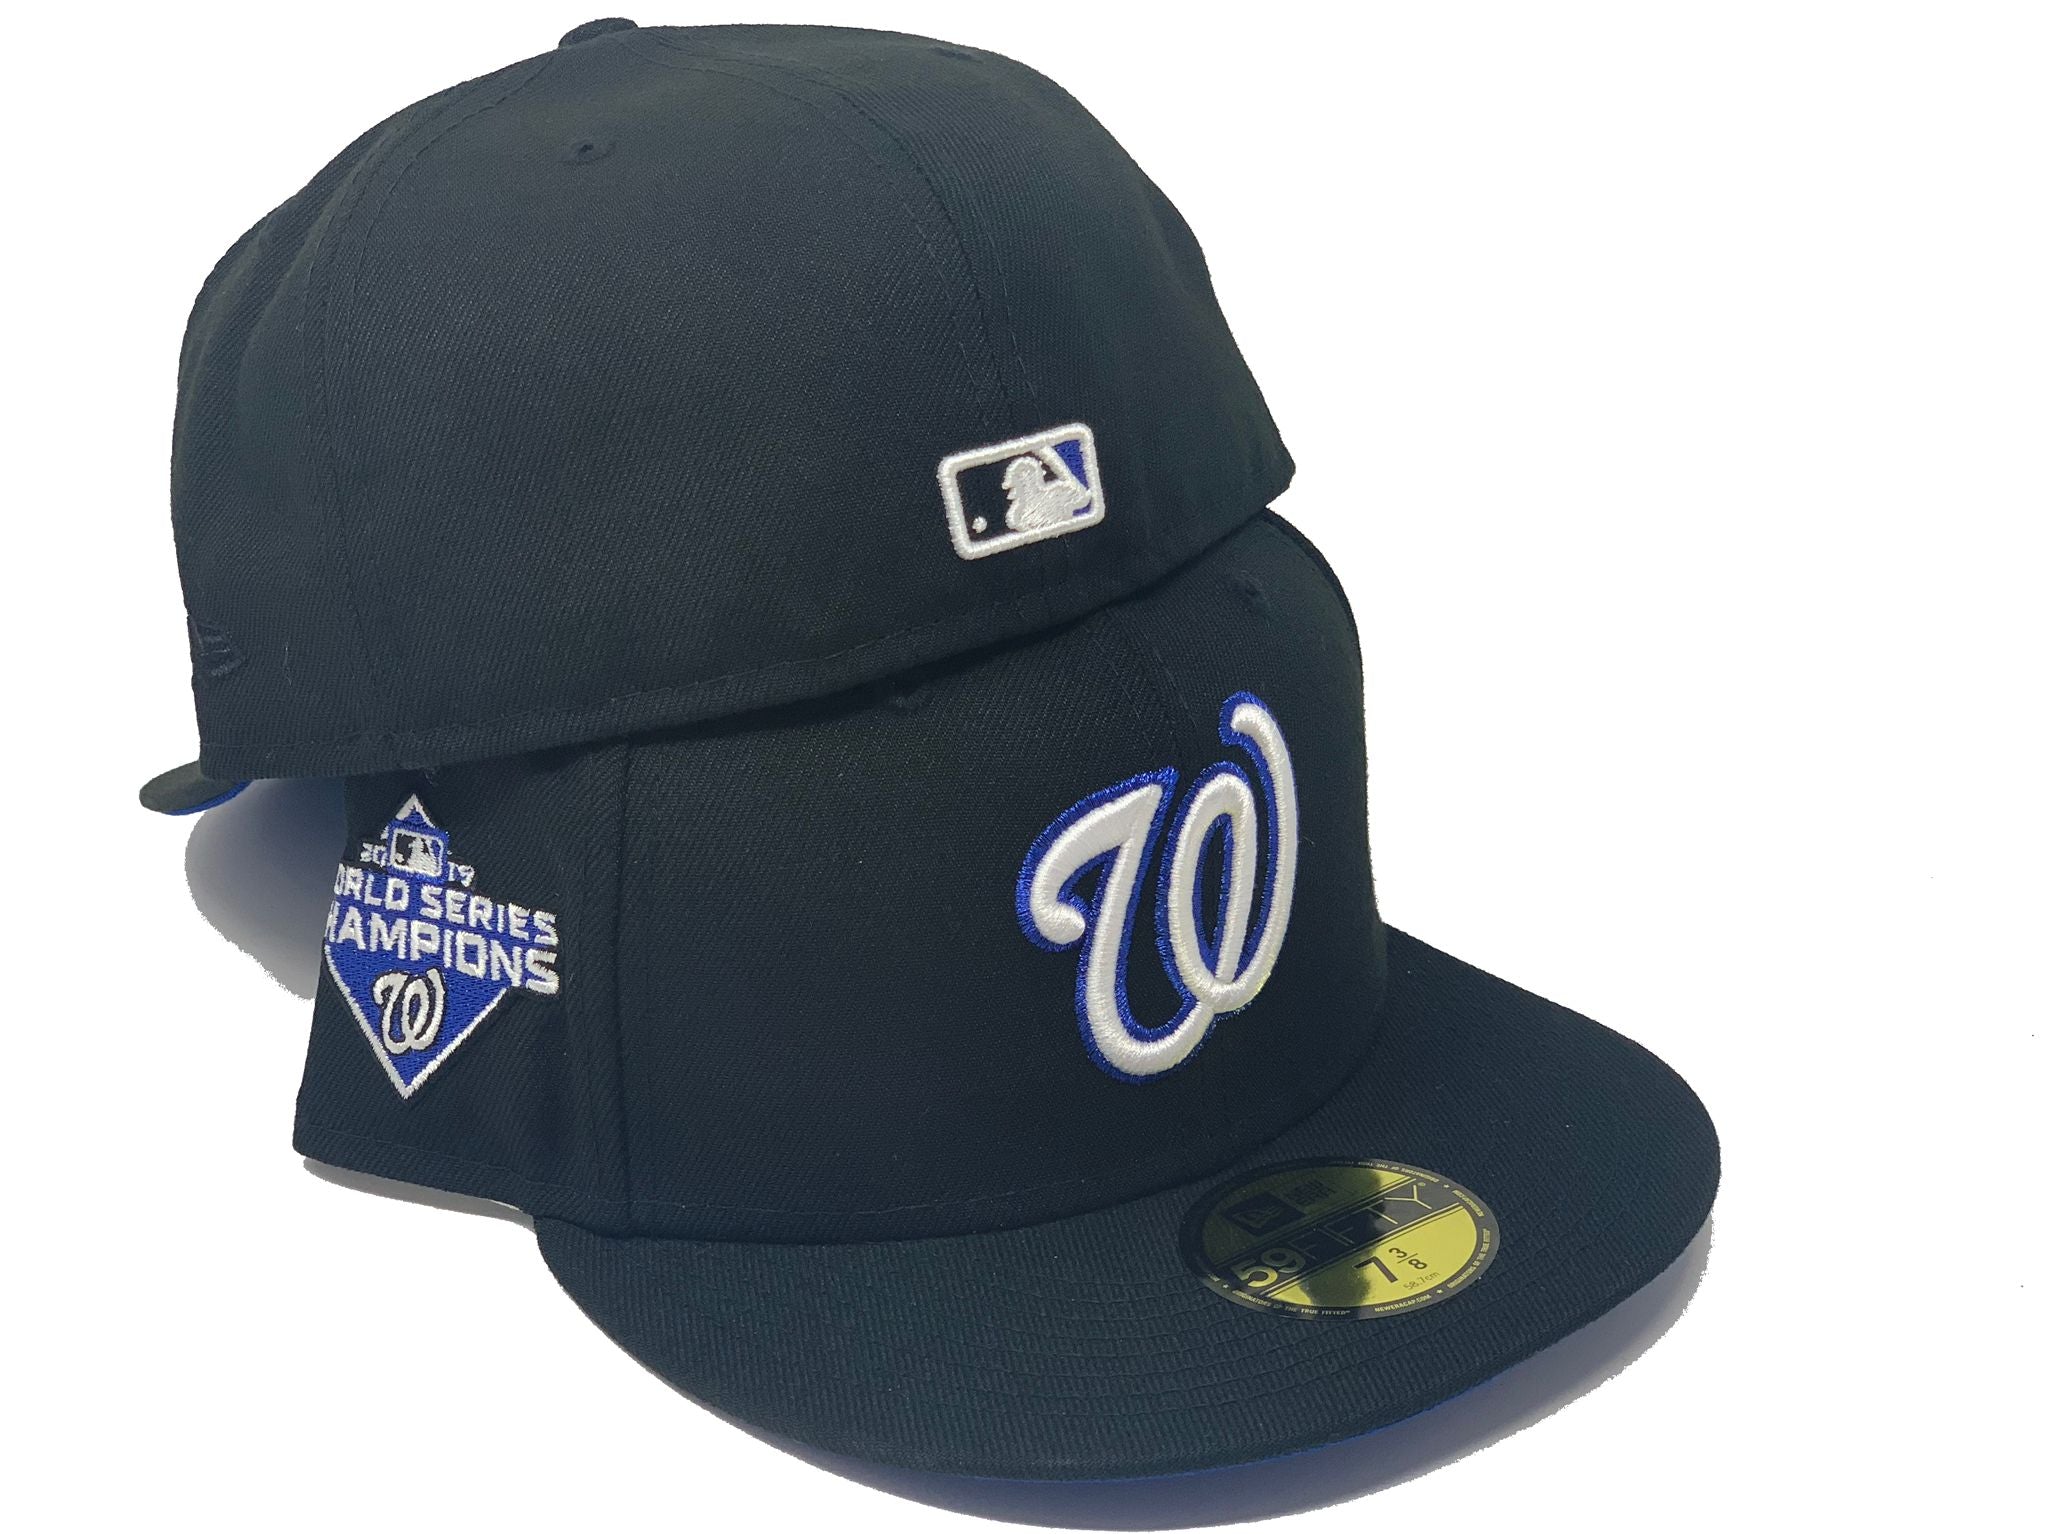 2019 Washington Nationals turn back the clock Expos kit. Were the jersey or  hats sold in store? Can't find any evidence of the jersey or low profile  hats ever being sold 